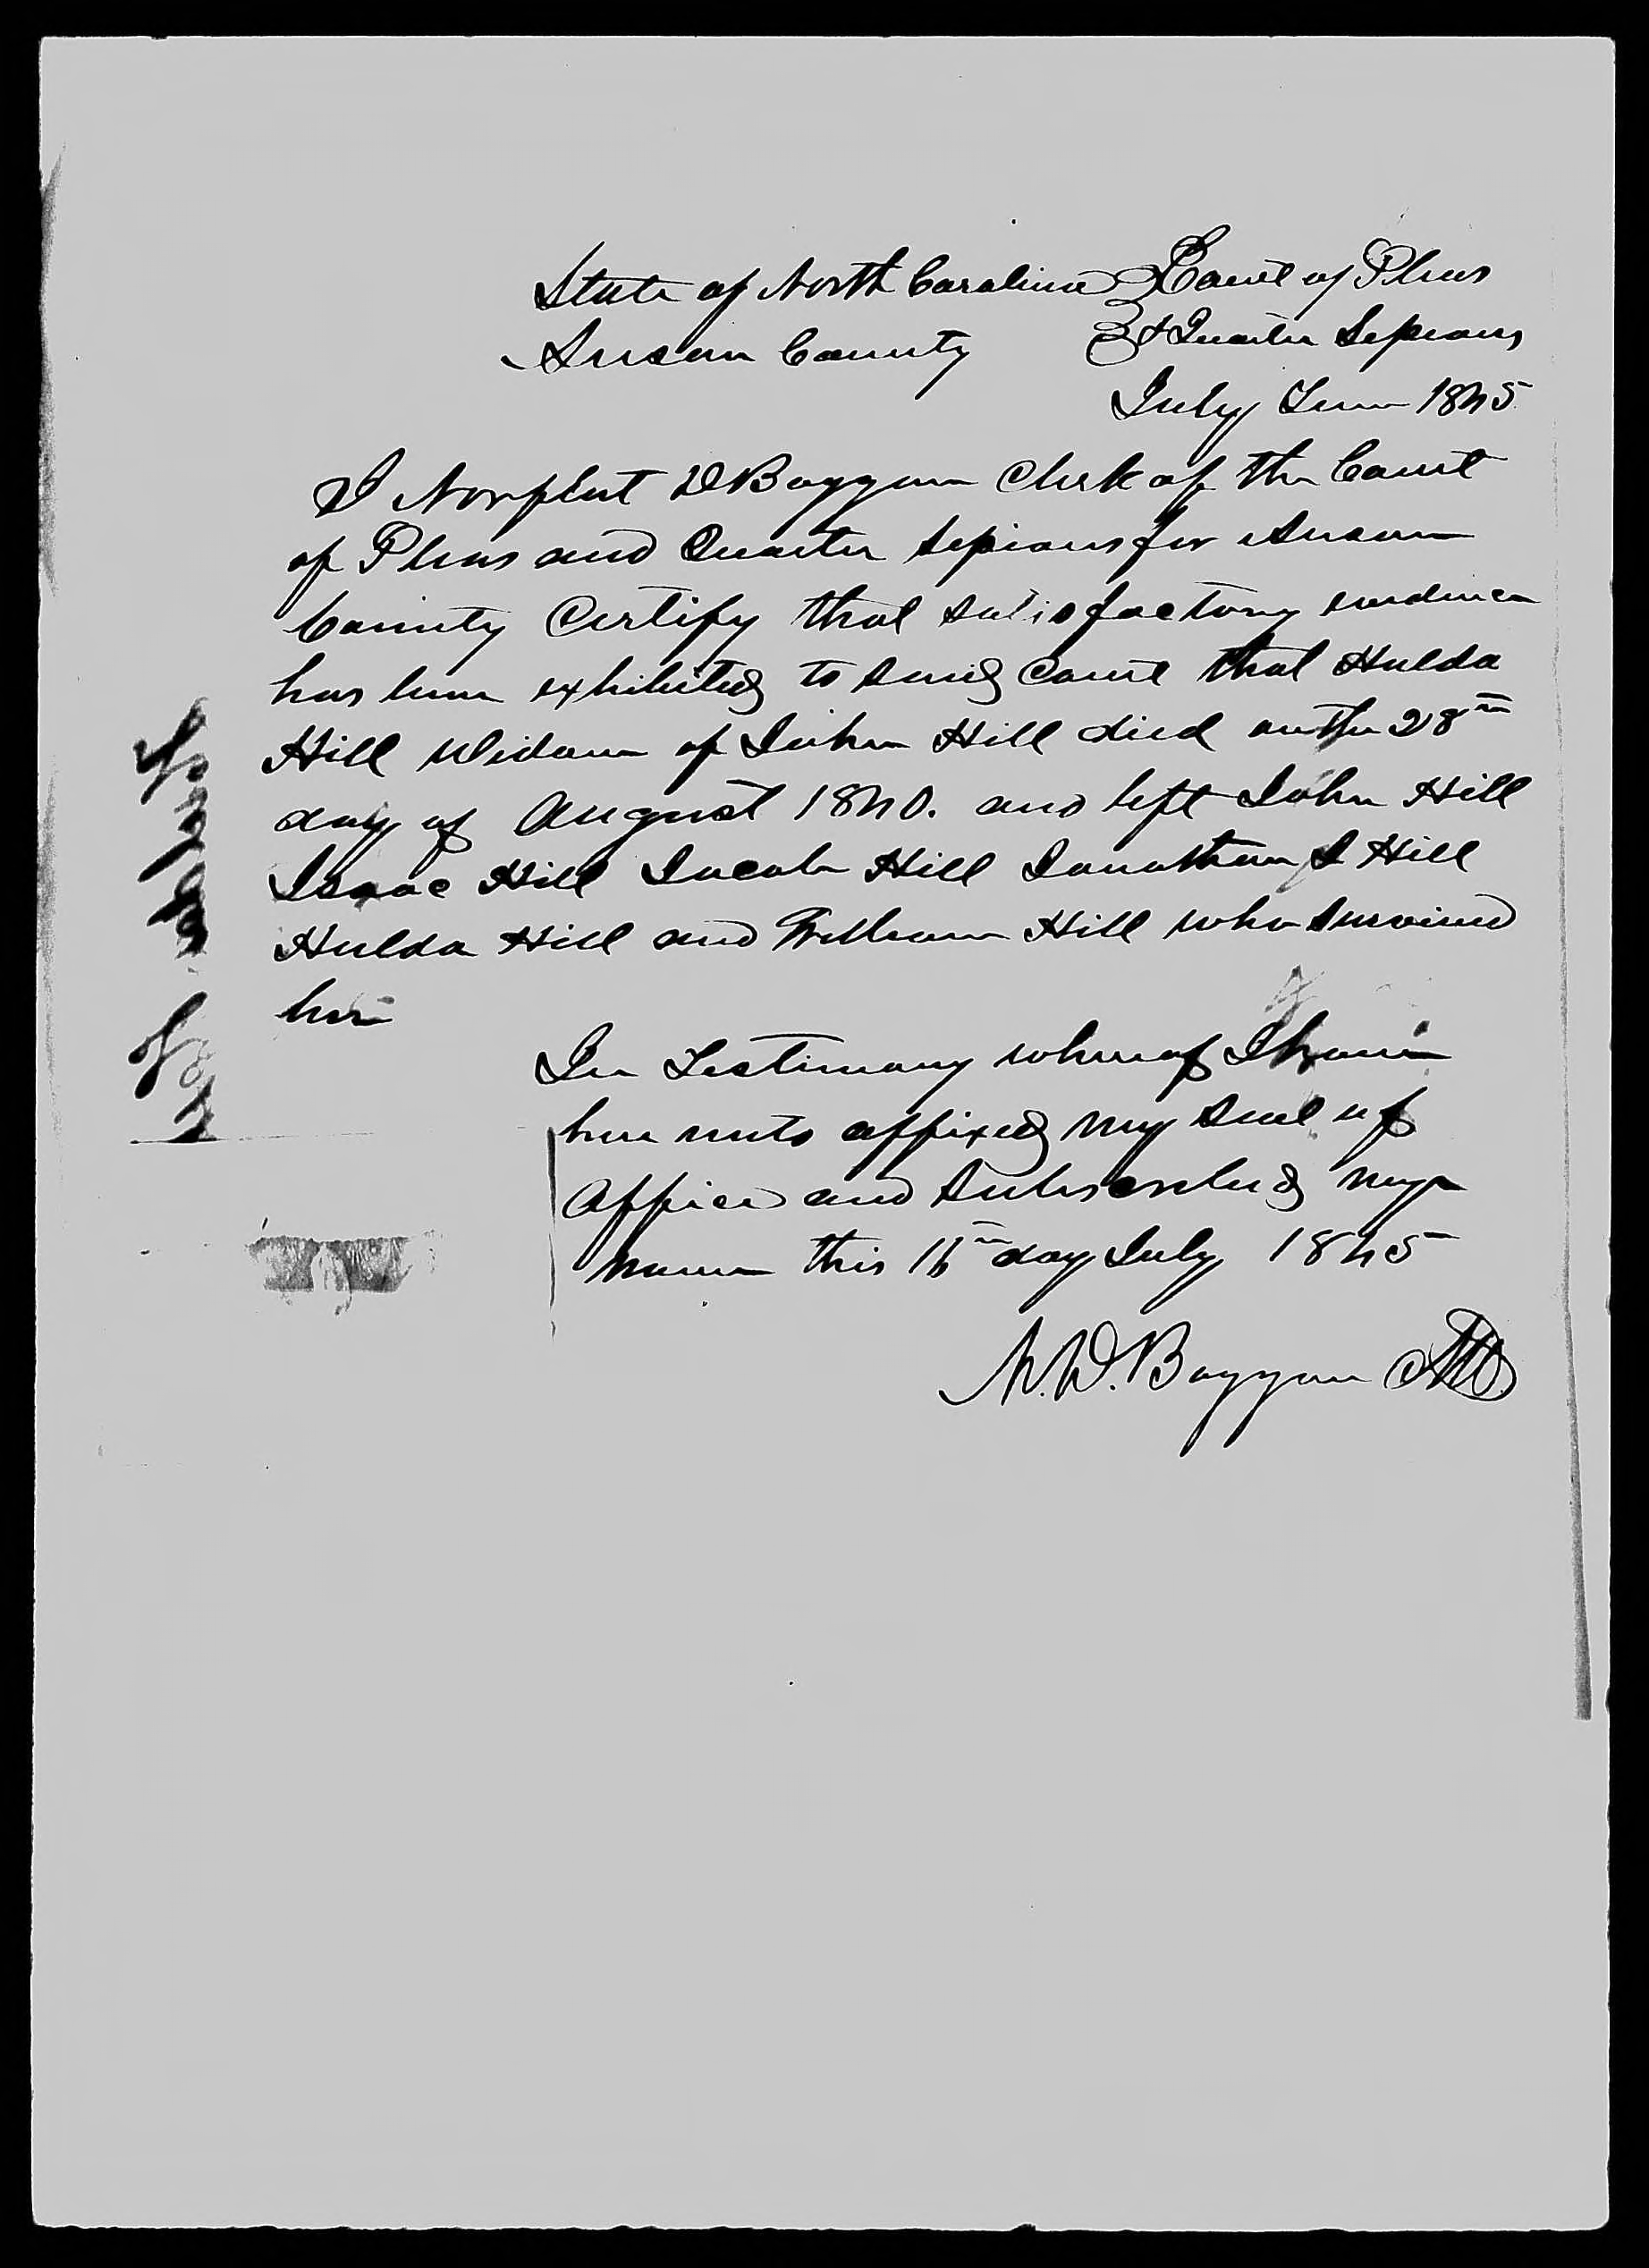 Proof of Death for Huldah Hill, circa July 1845